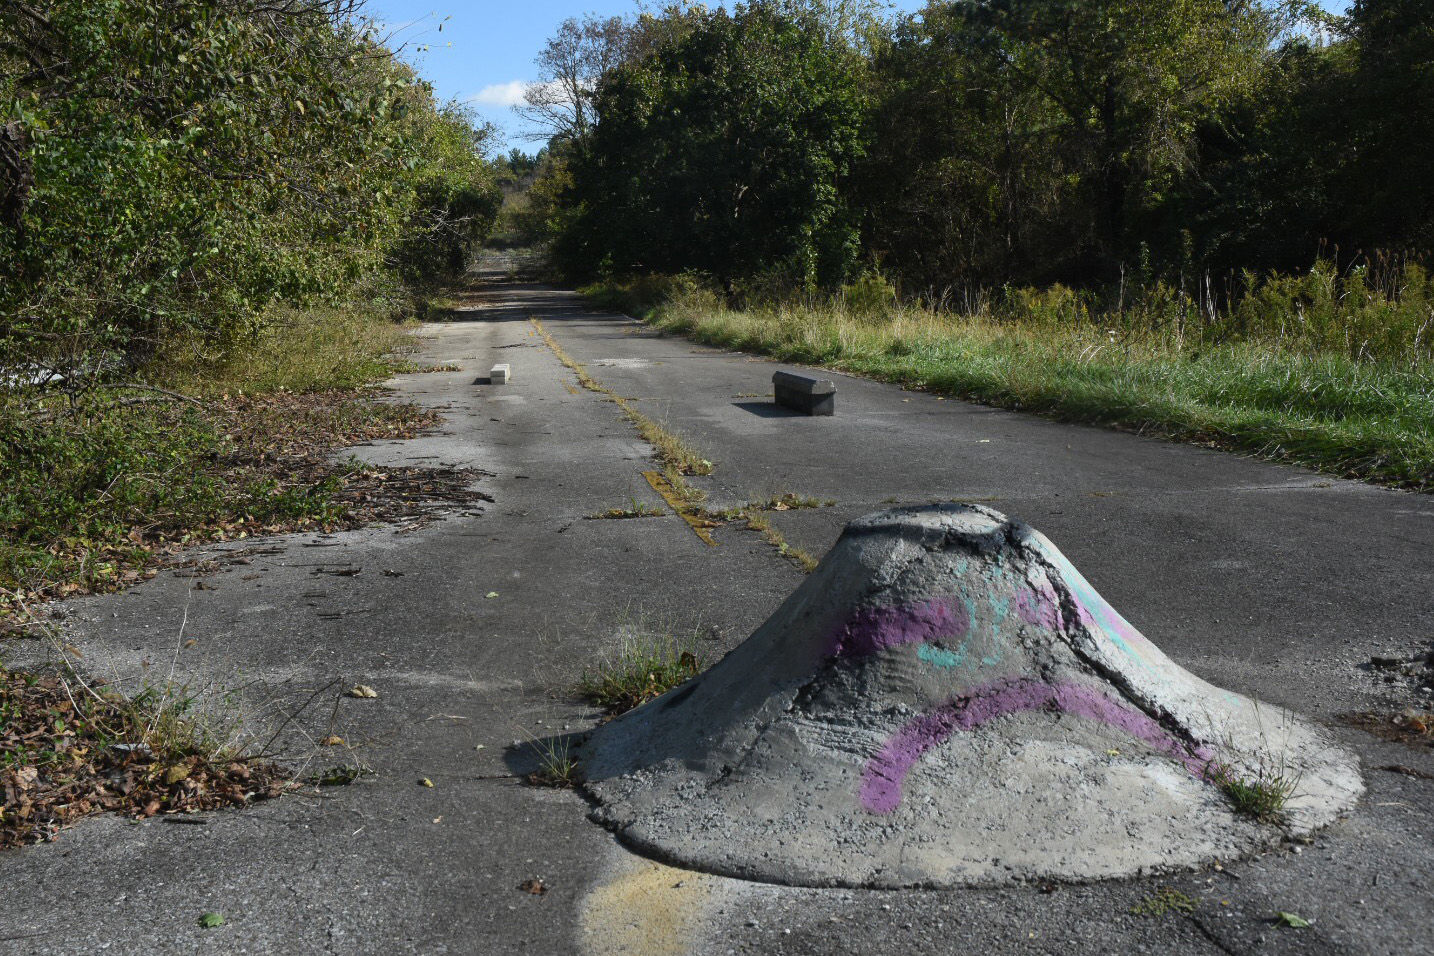 A slapdash skate park was cobbled together on a portion of the old road that leads toward the Monocacy River. (WTOP/Dave Dildine)